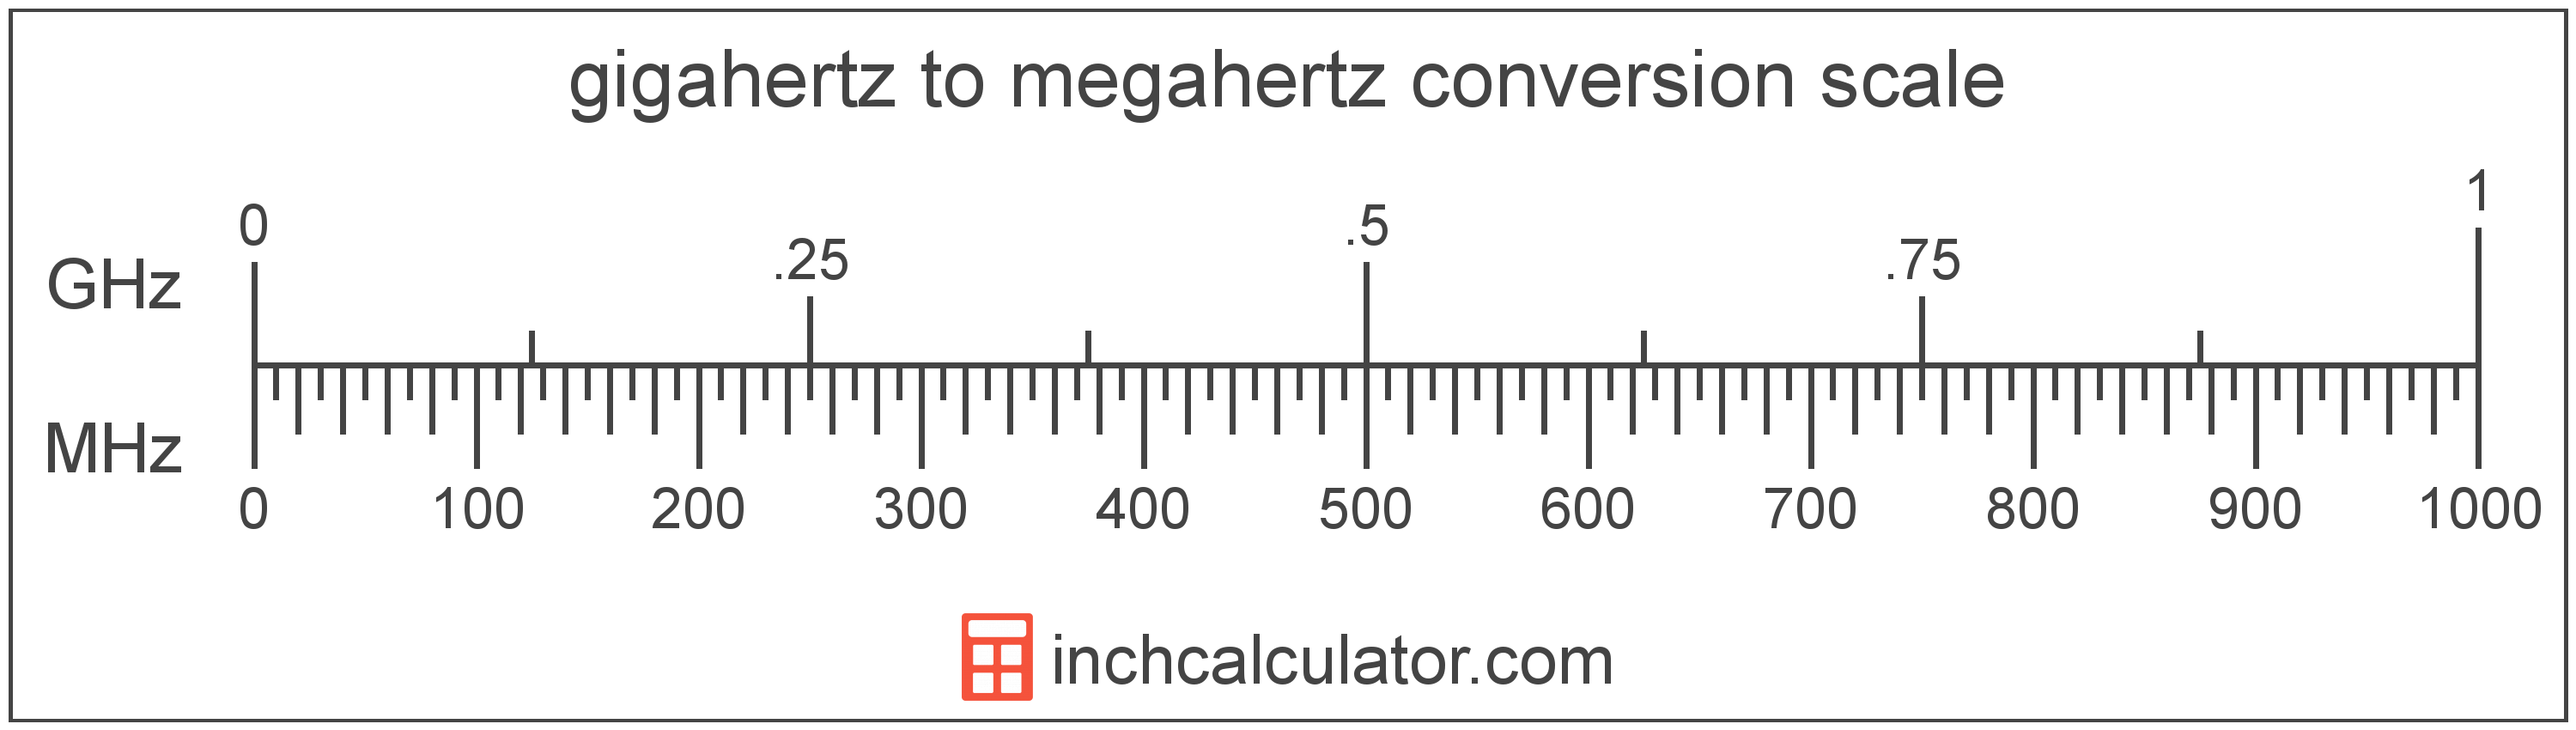 conversion scale showing gigahertz and equivalent megahertz frequency values